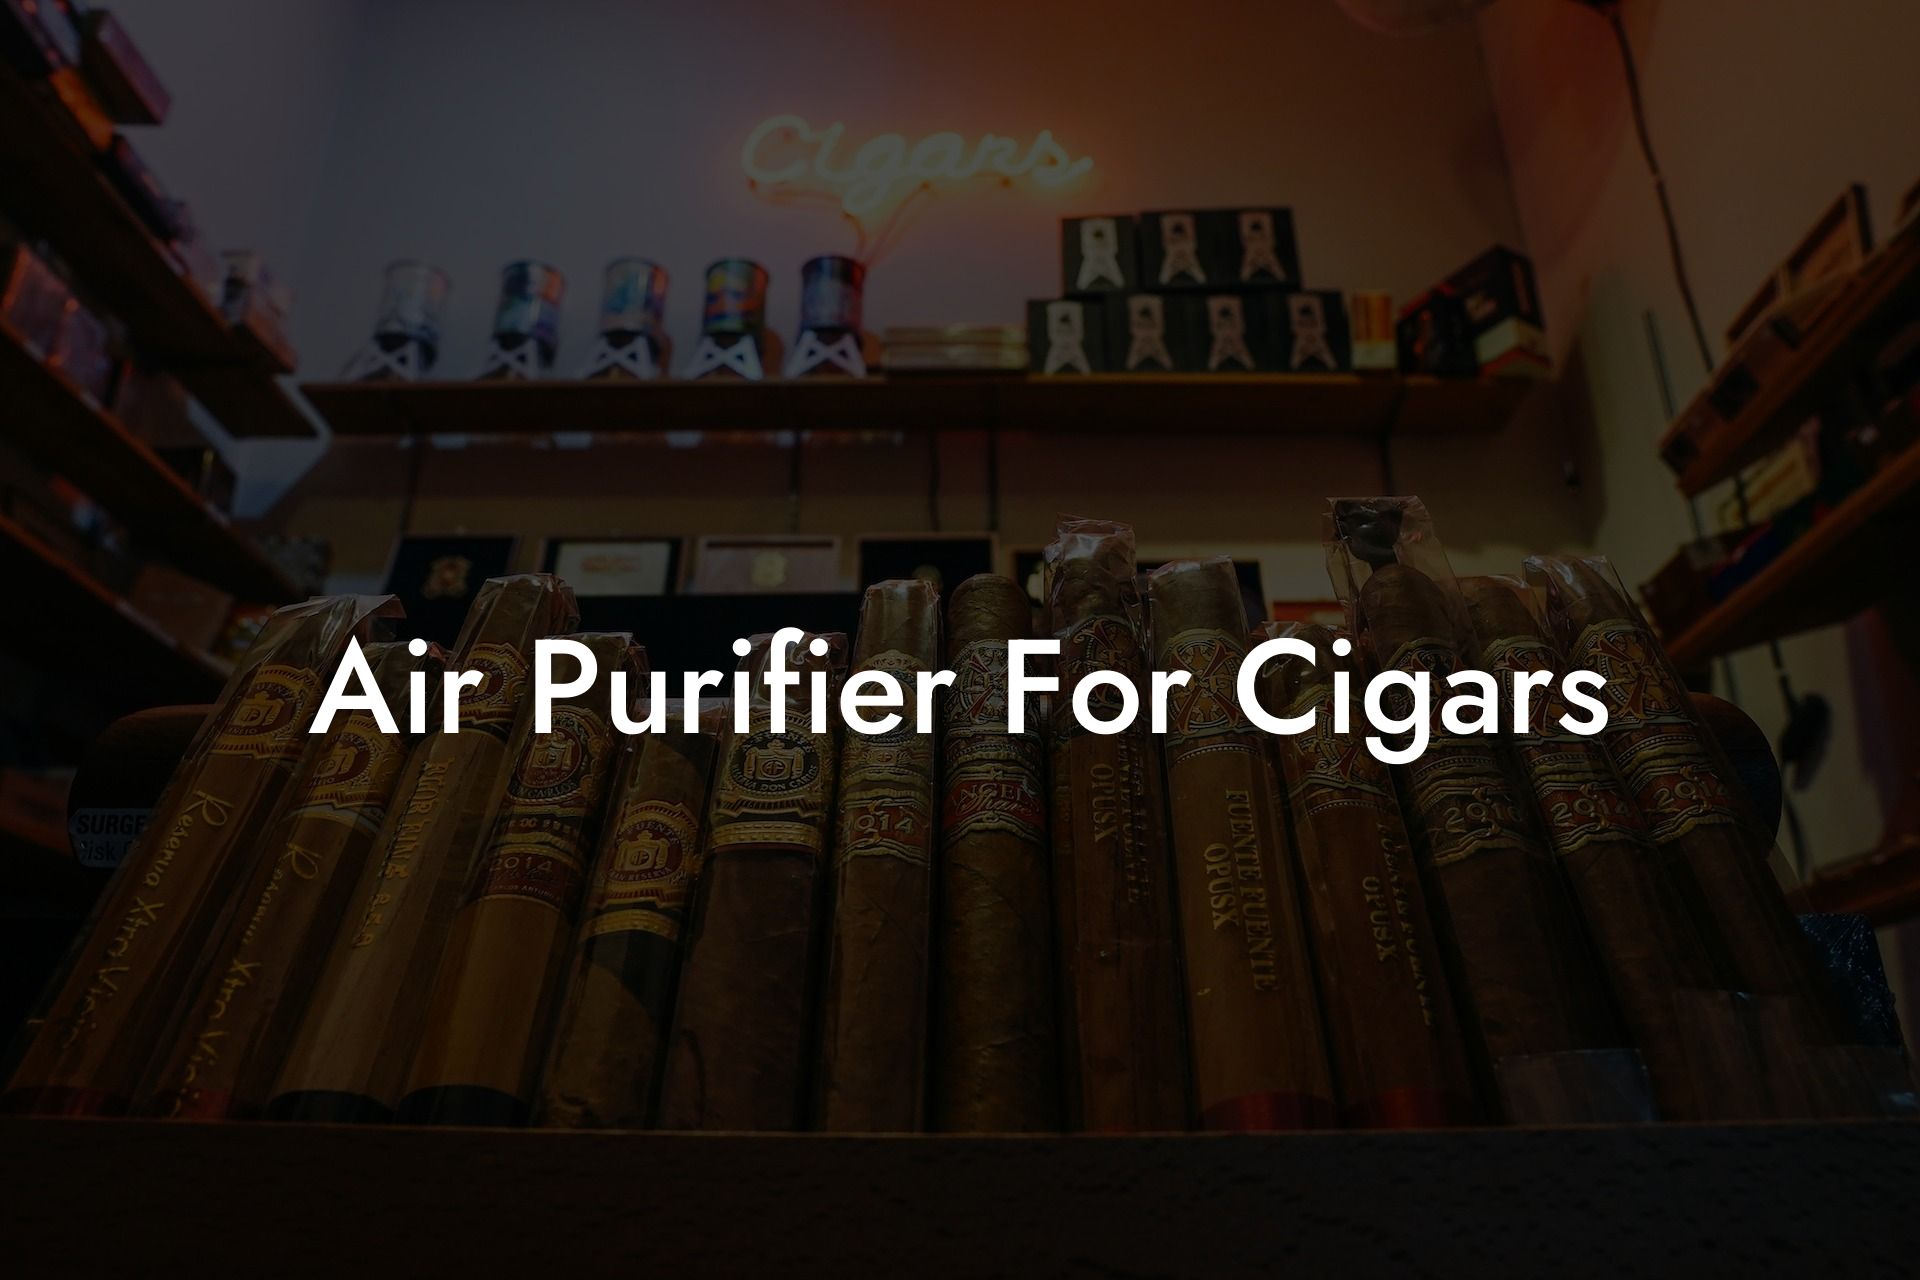 Air Purifier For Cigars